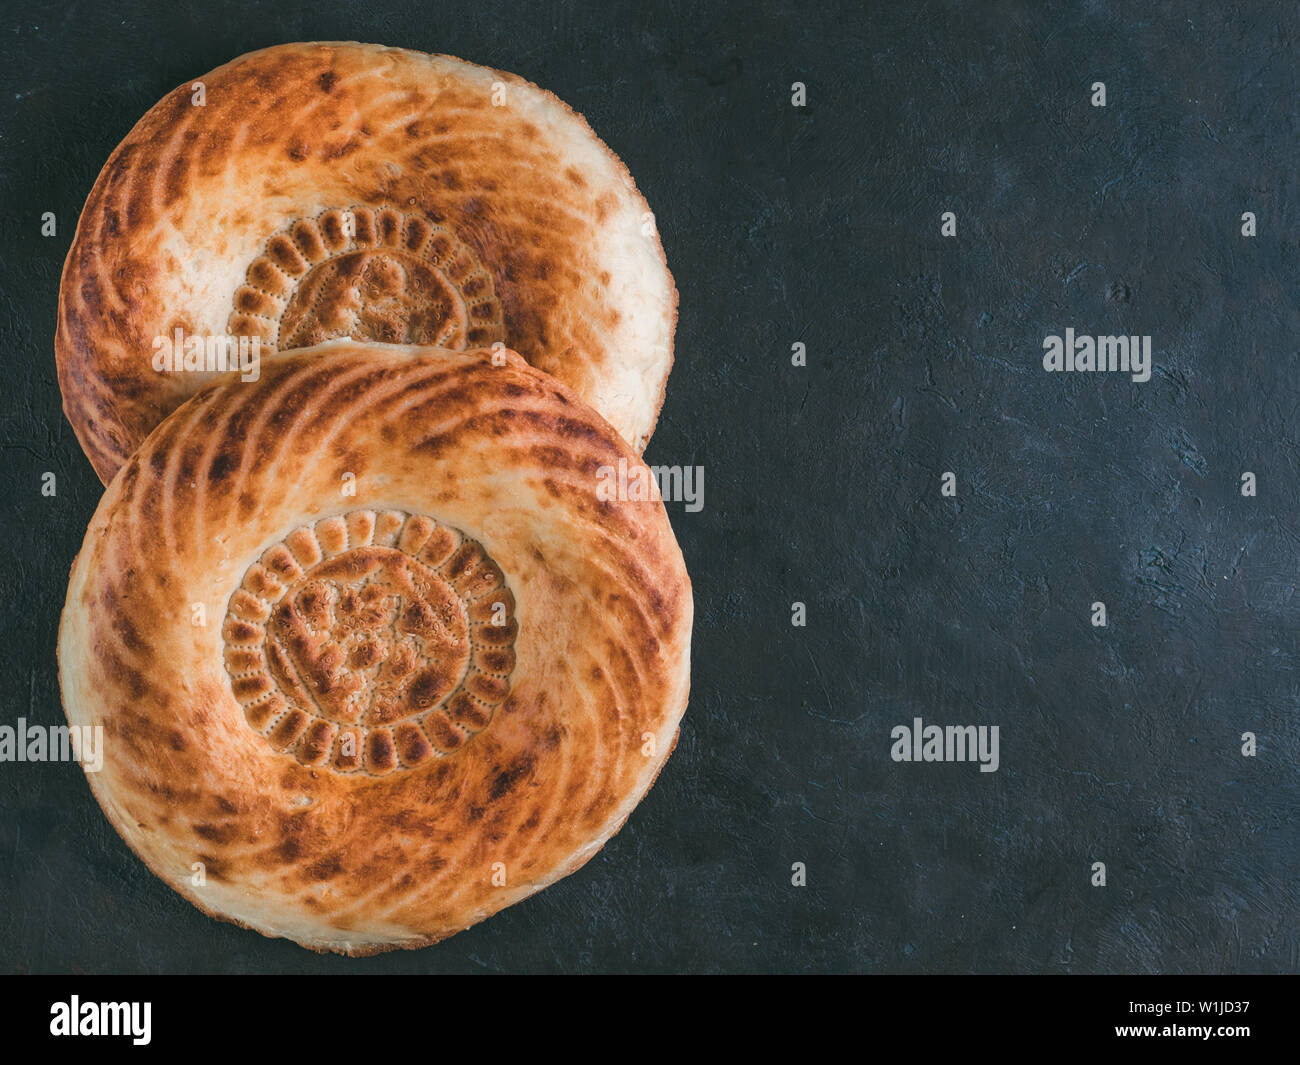 Tasty fresh tandoor bread on black table. Two tandoor flat bread cake on dark stone background. National asian meal and food. Copy space for text. Top view or flat lay. Stock Photo